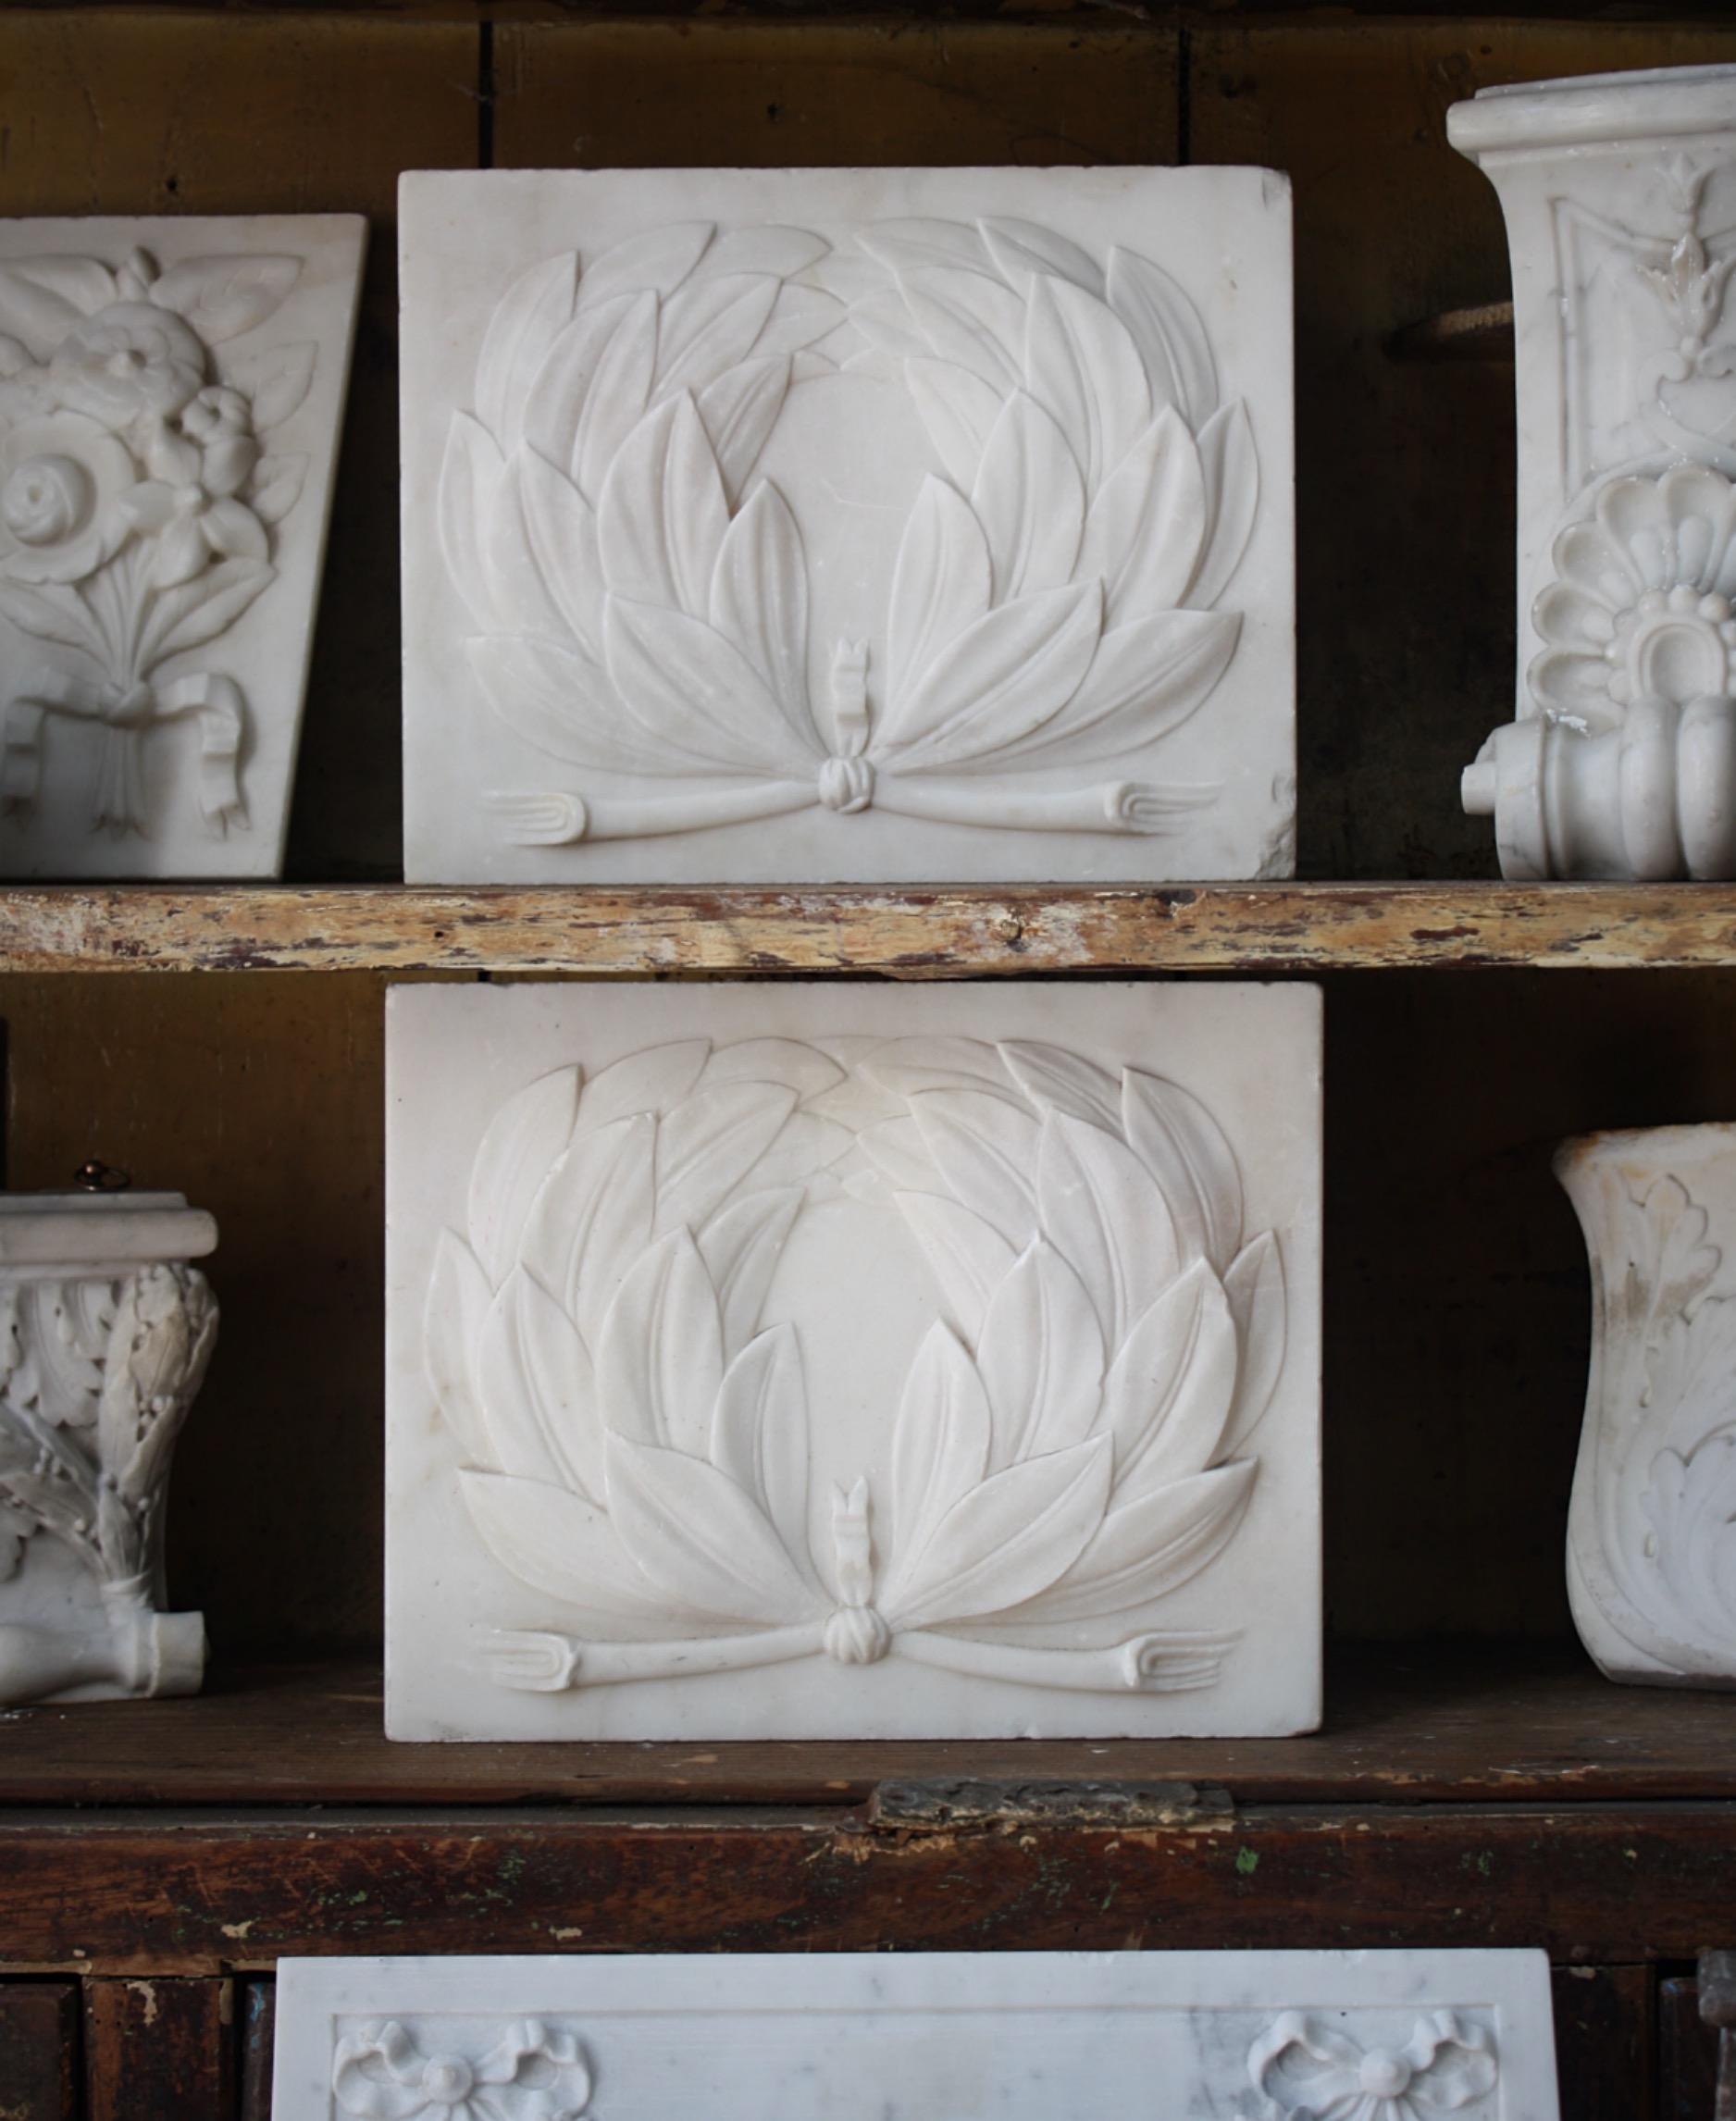 A fine pair of carved marble tablets/architectural elements with delicately carved organic decorations, depicting a laurel wreath a prominent image from Greek history, the tablets previously part of larger feature like a grand fireplace.

The pair